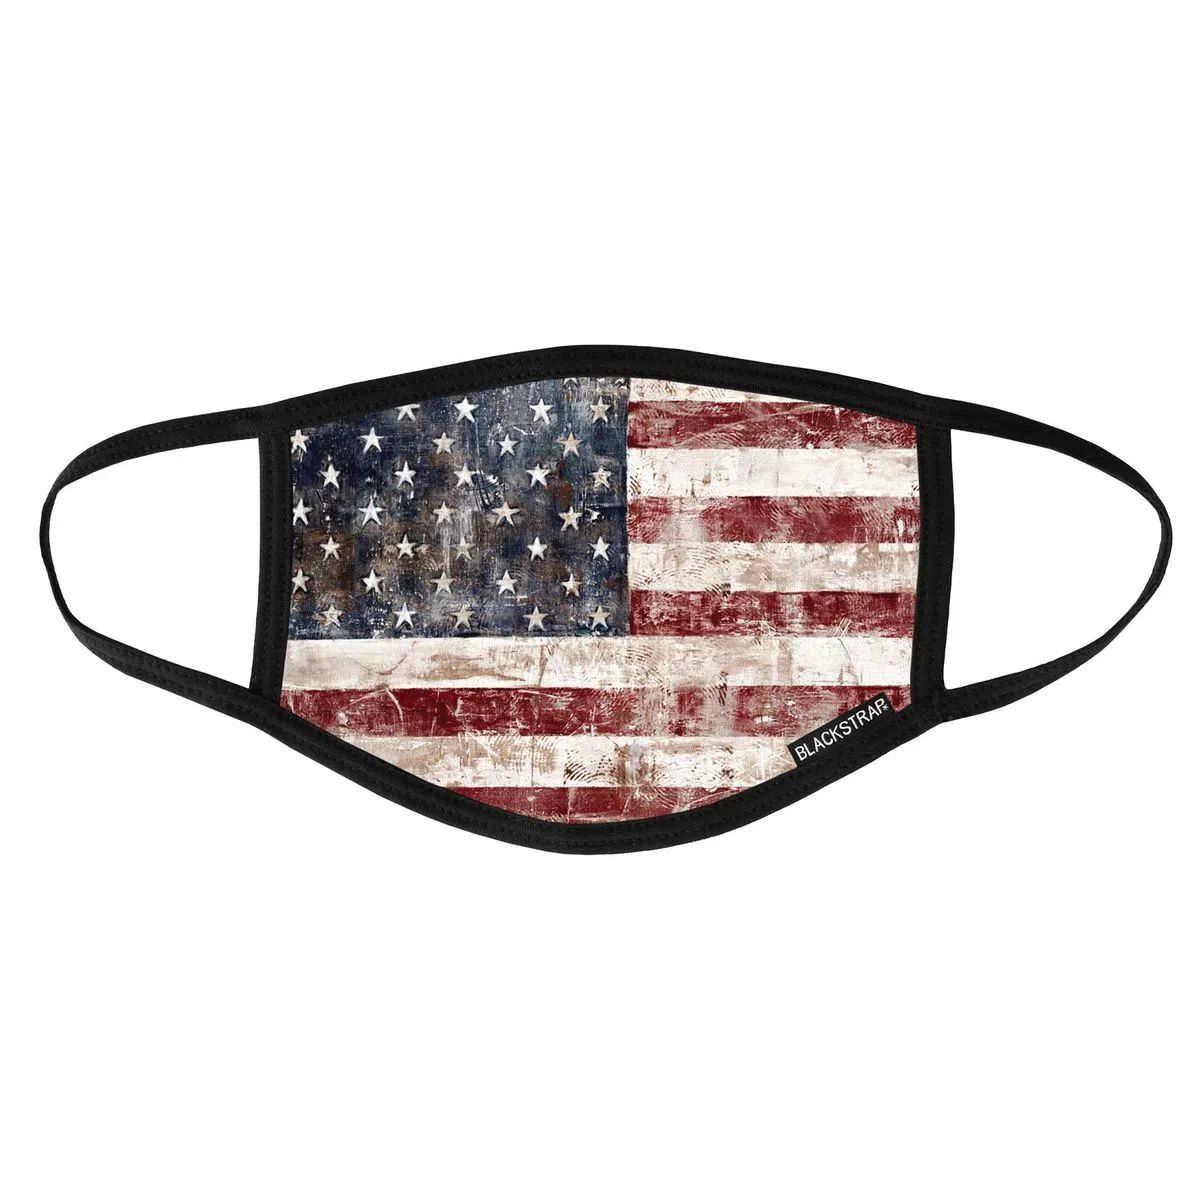 BlackStrap The Civil Mask Old Glory OS Neck Warmers & Face Masks